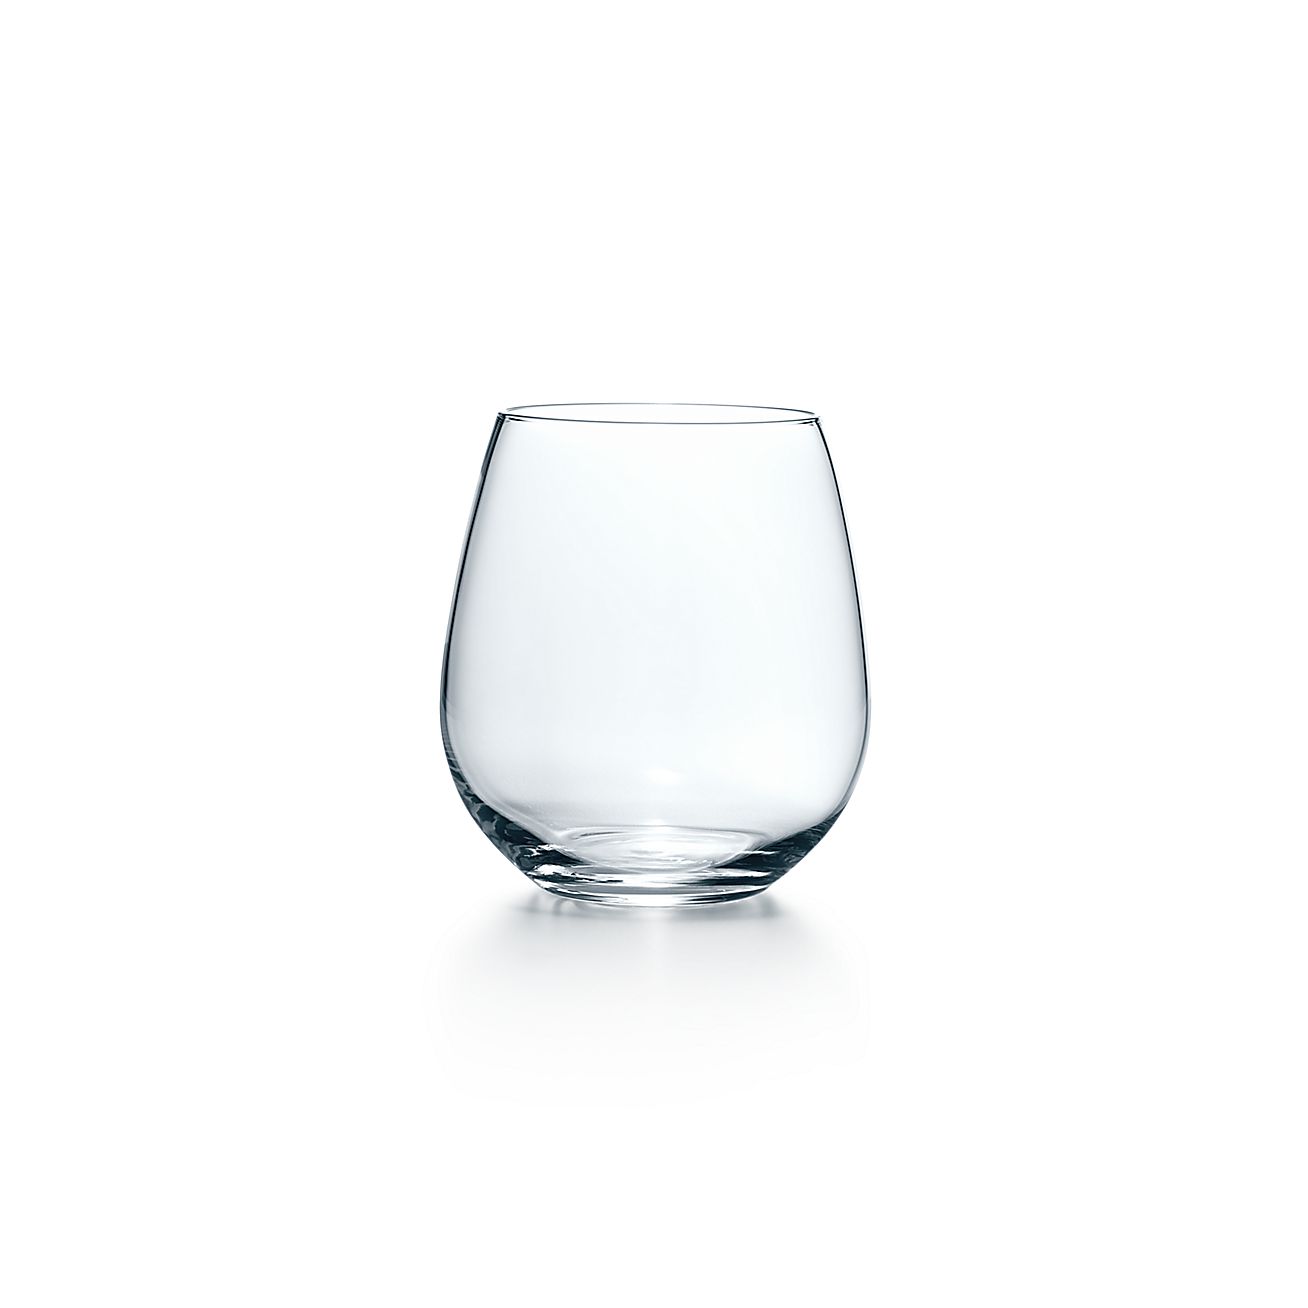 Tiffany Home Essentials Stemless Red Wine Glasses